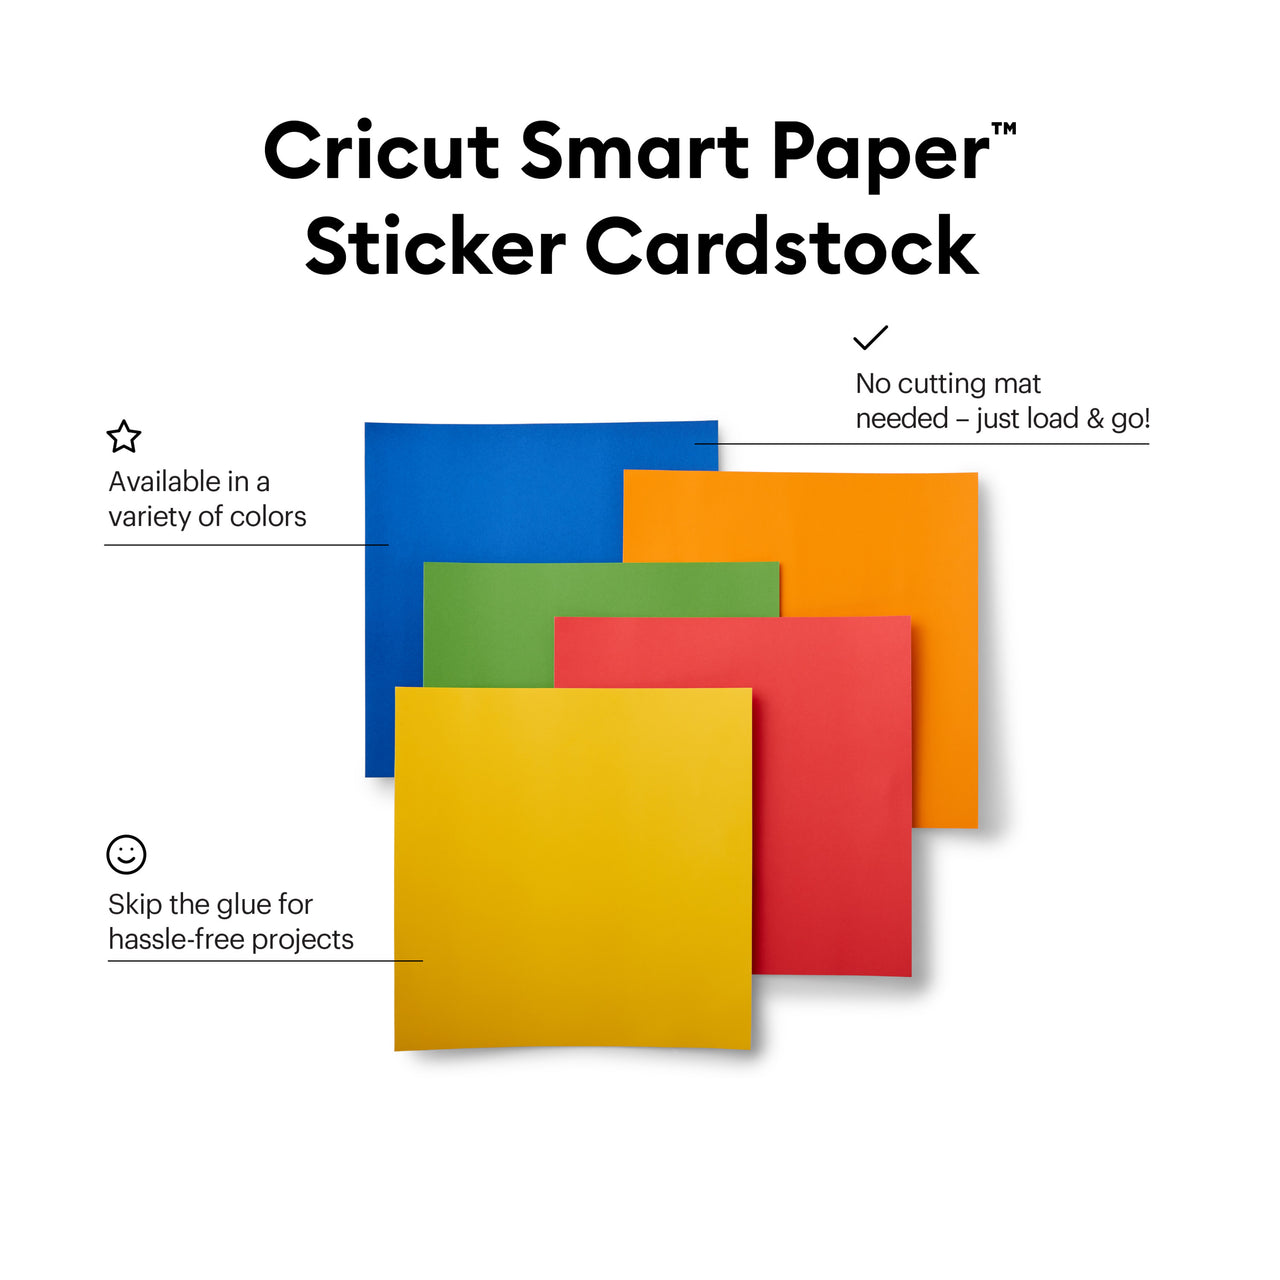 Cricut Smart Paper Sticker Cardstock Black, White, Bright Bow, and Pastels Bundle 10 Sheets - 13in x 13in - Adhesive Paper for Stickers